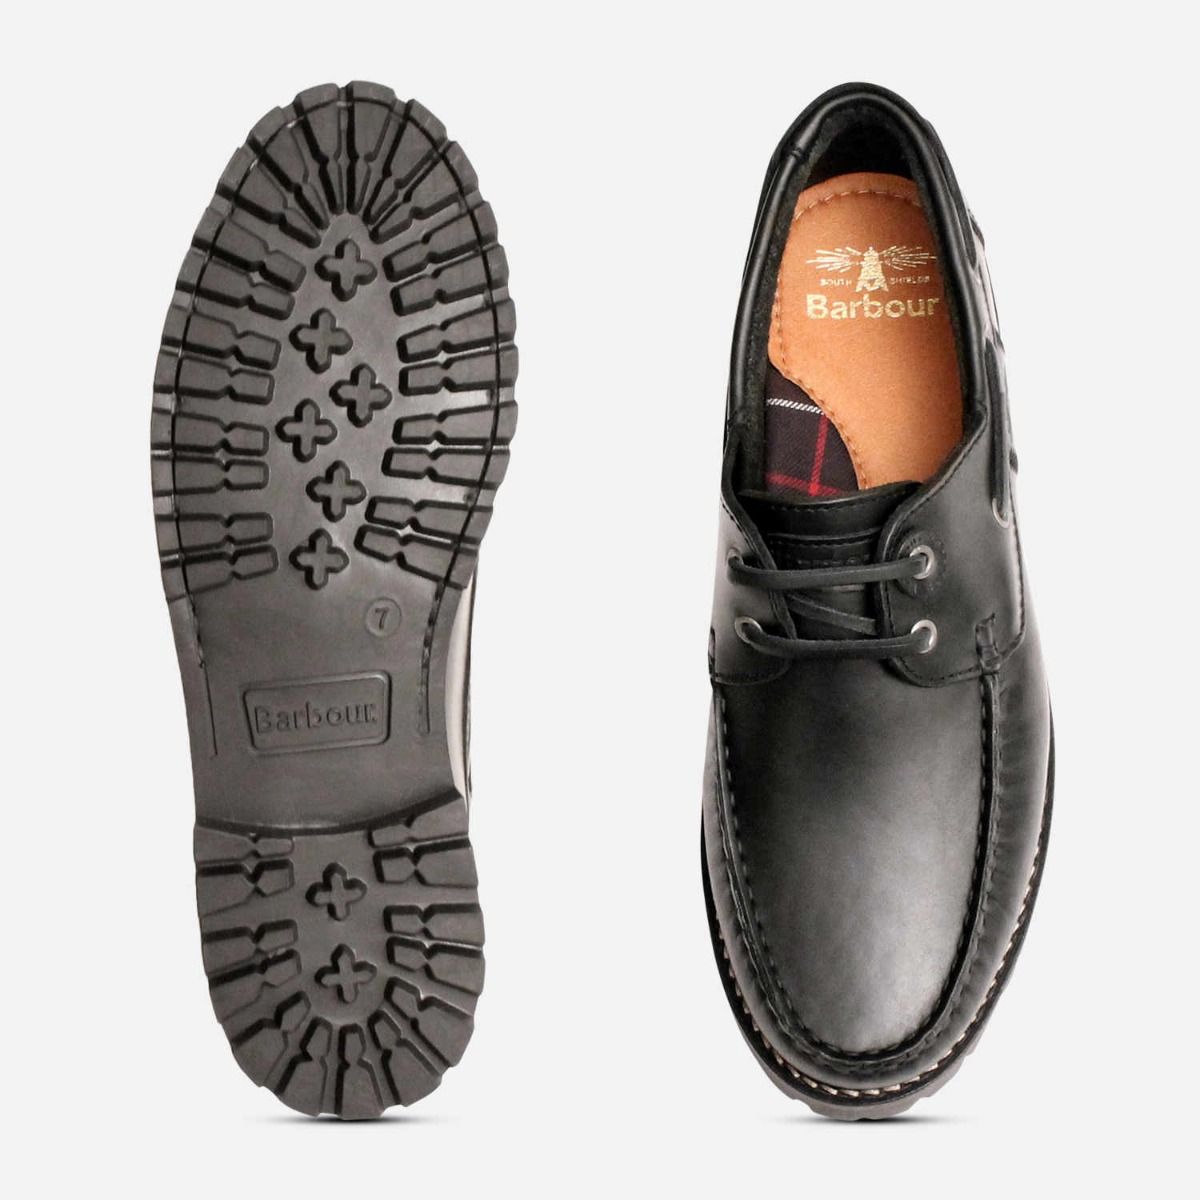 barbour boat shoes brown